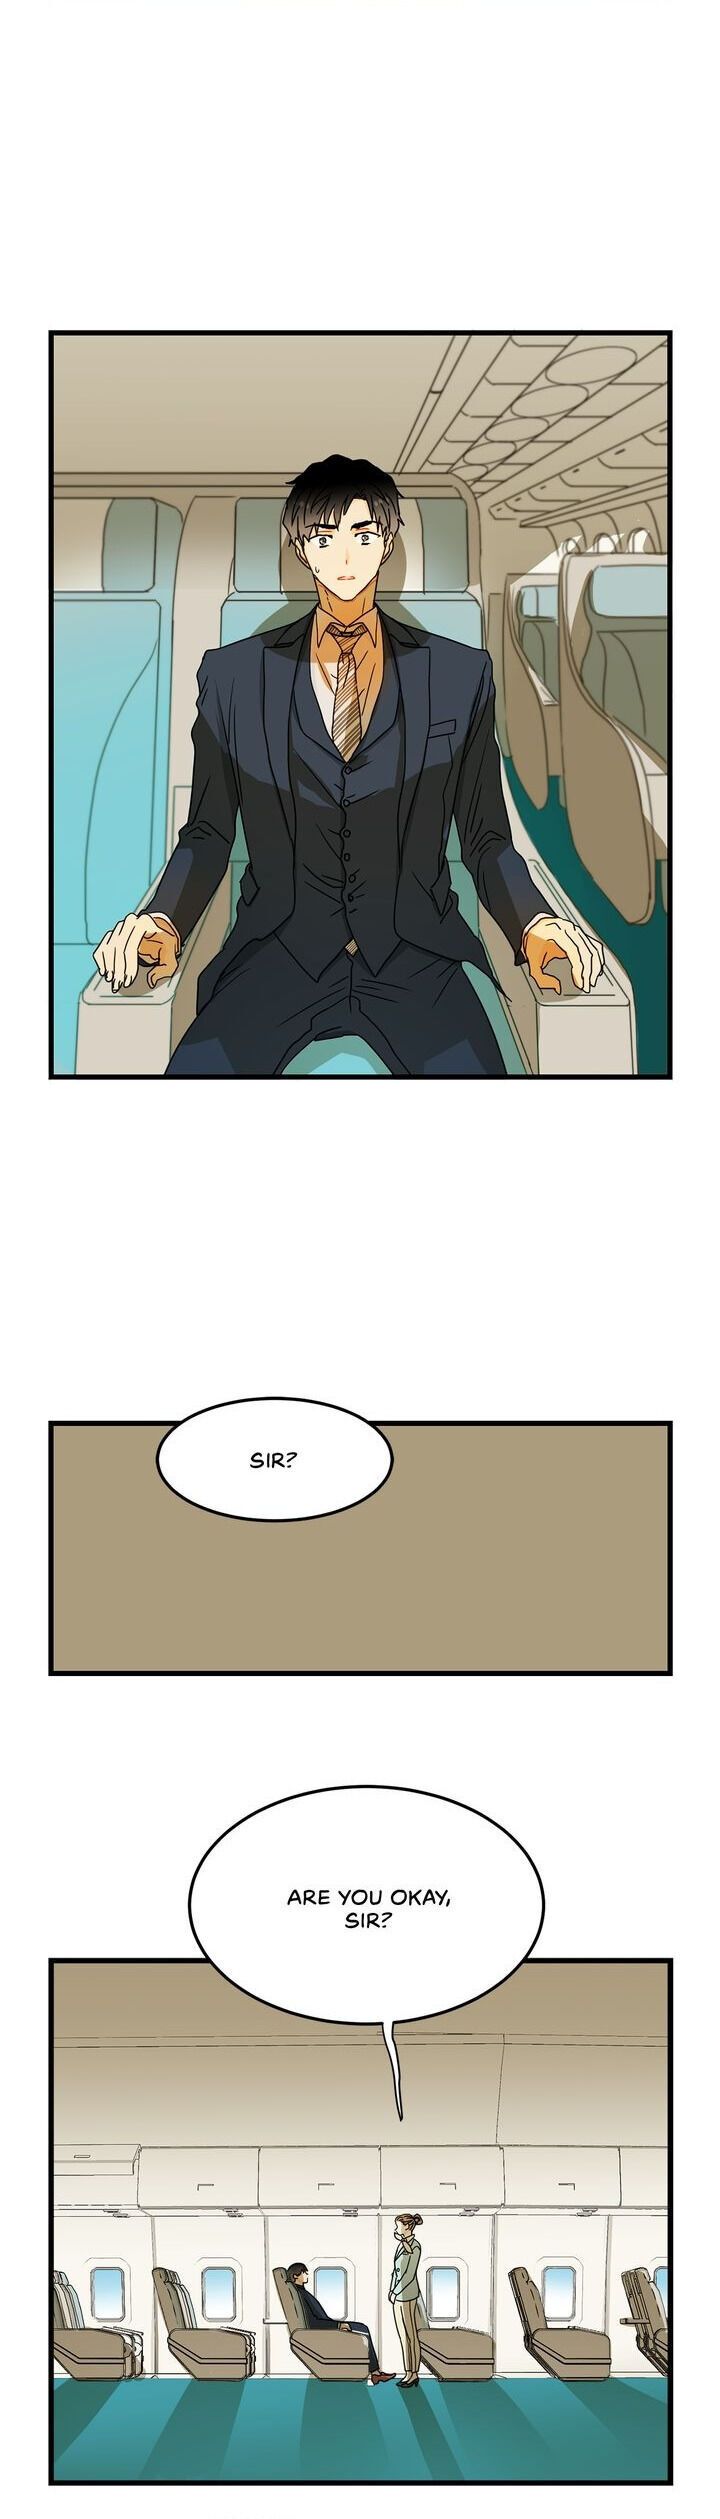 Faking It in Style Chapter 001 page 13